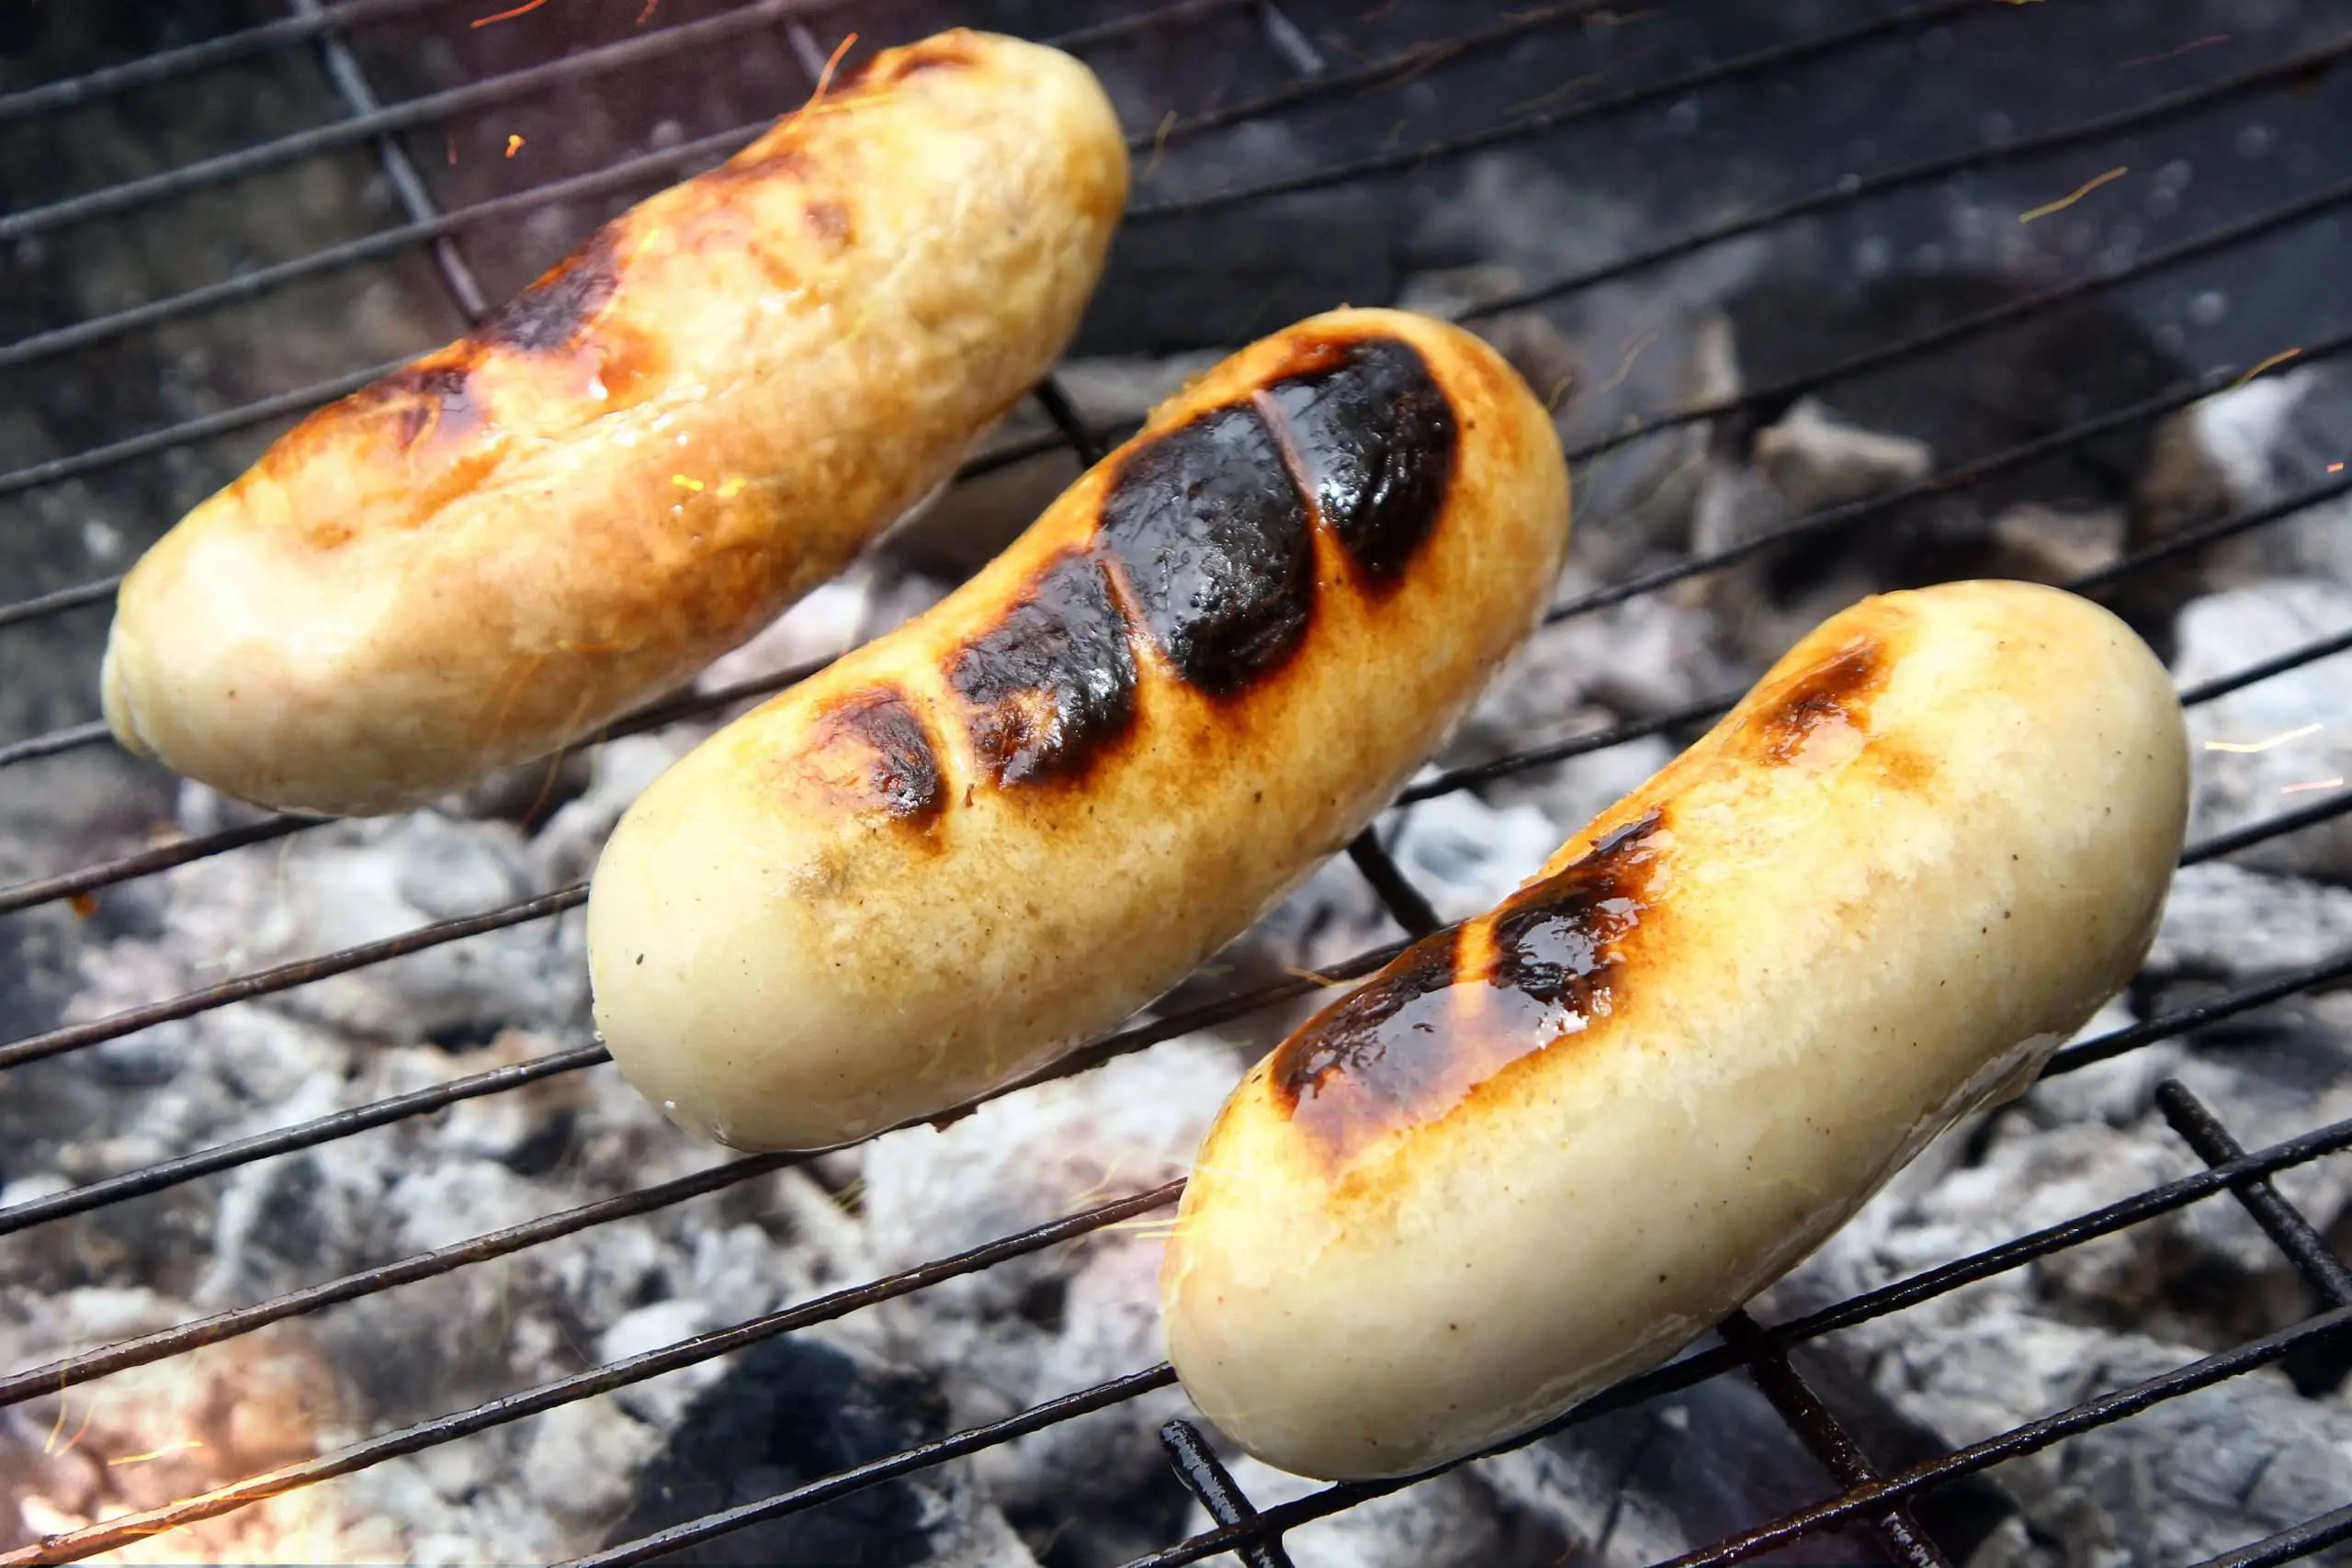 How to Grill Bratwurst: 13 Steps (with Pictures)